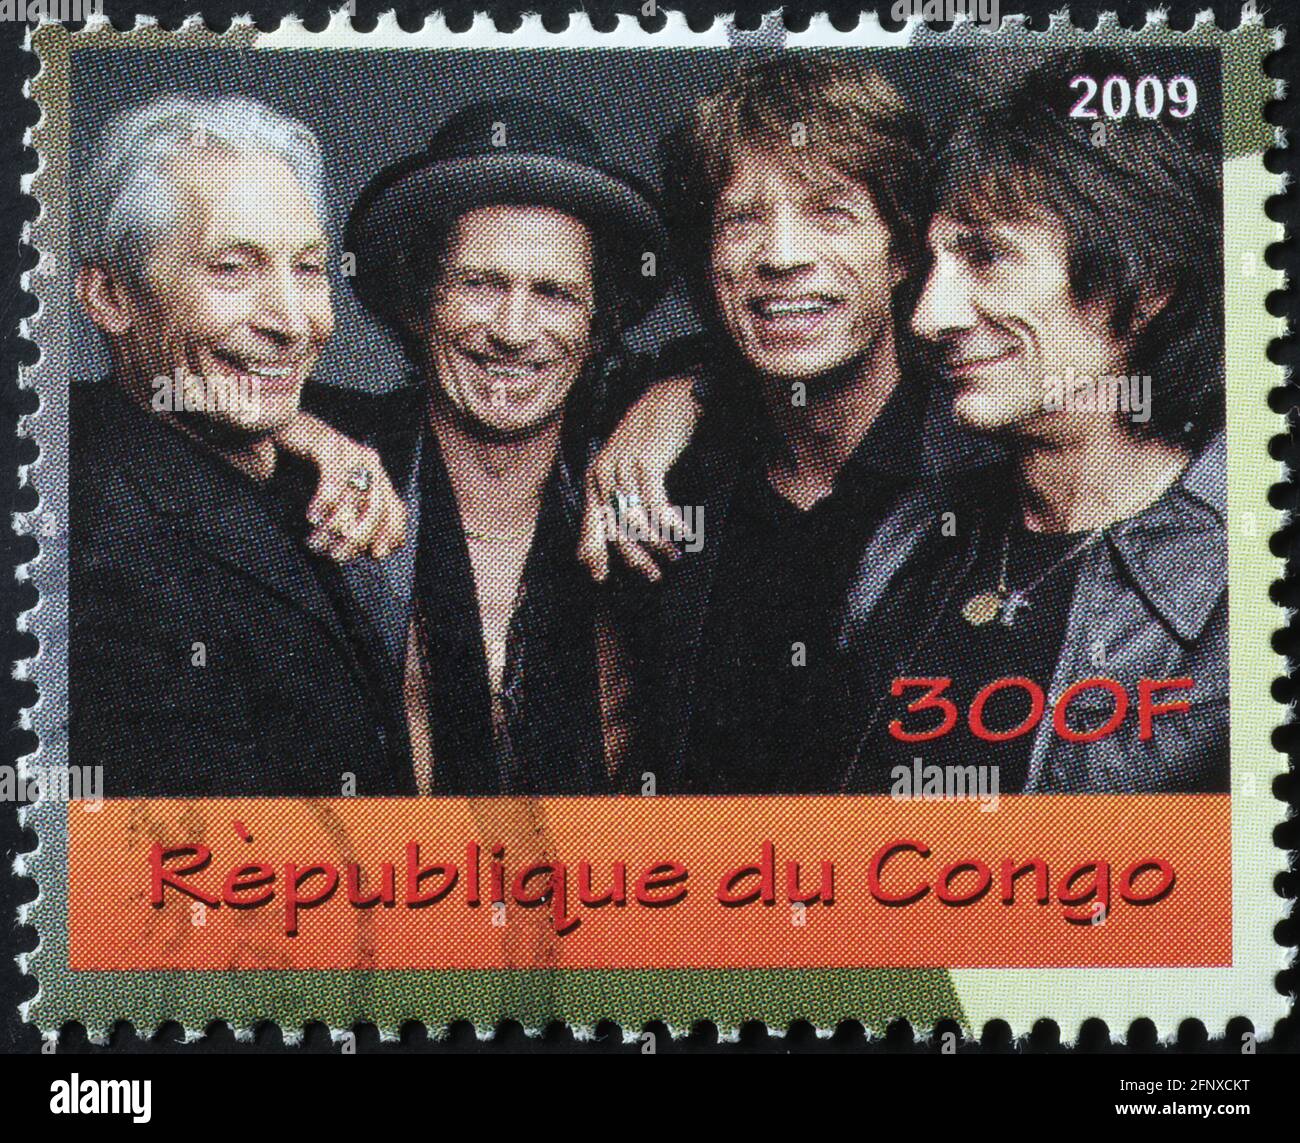 Rolling Stones portrait on african postage stamp Stock Photo